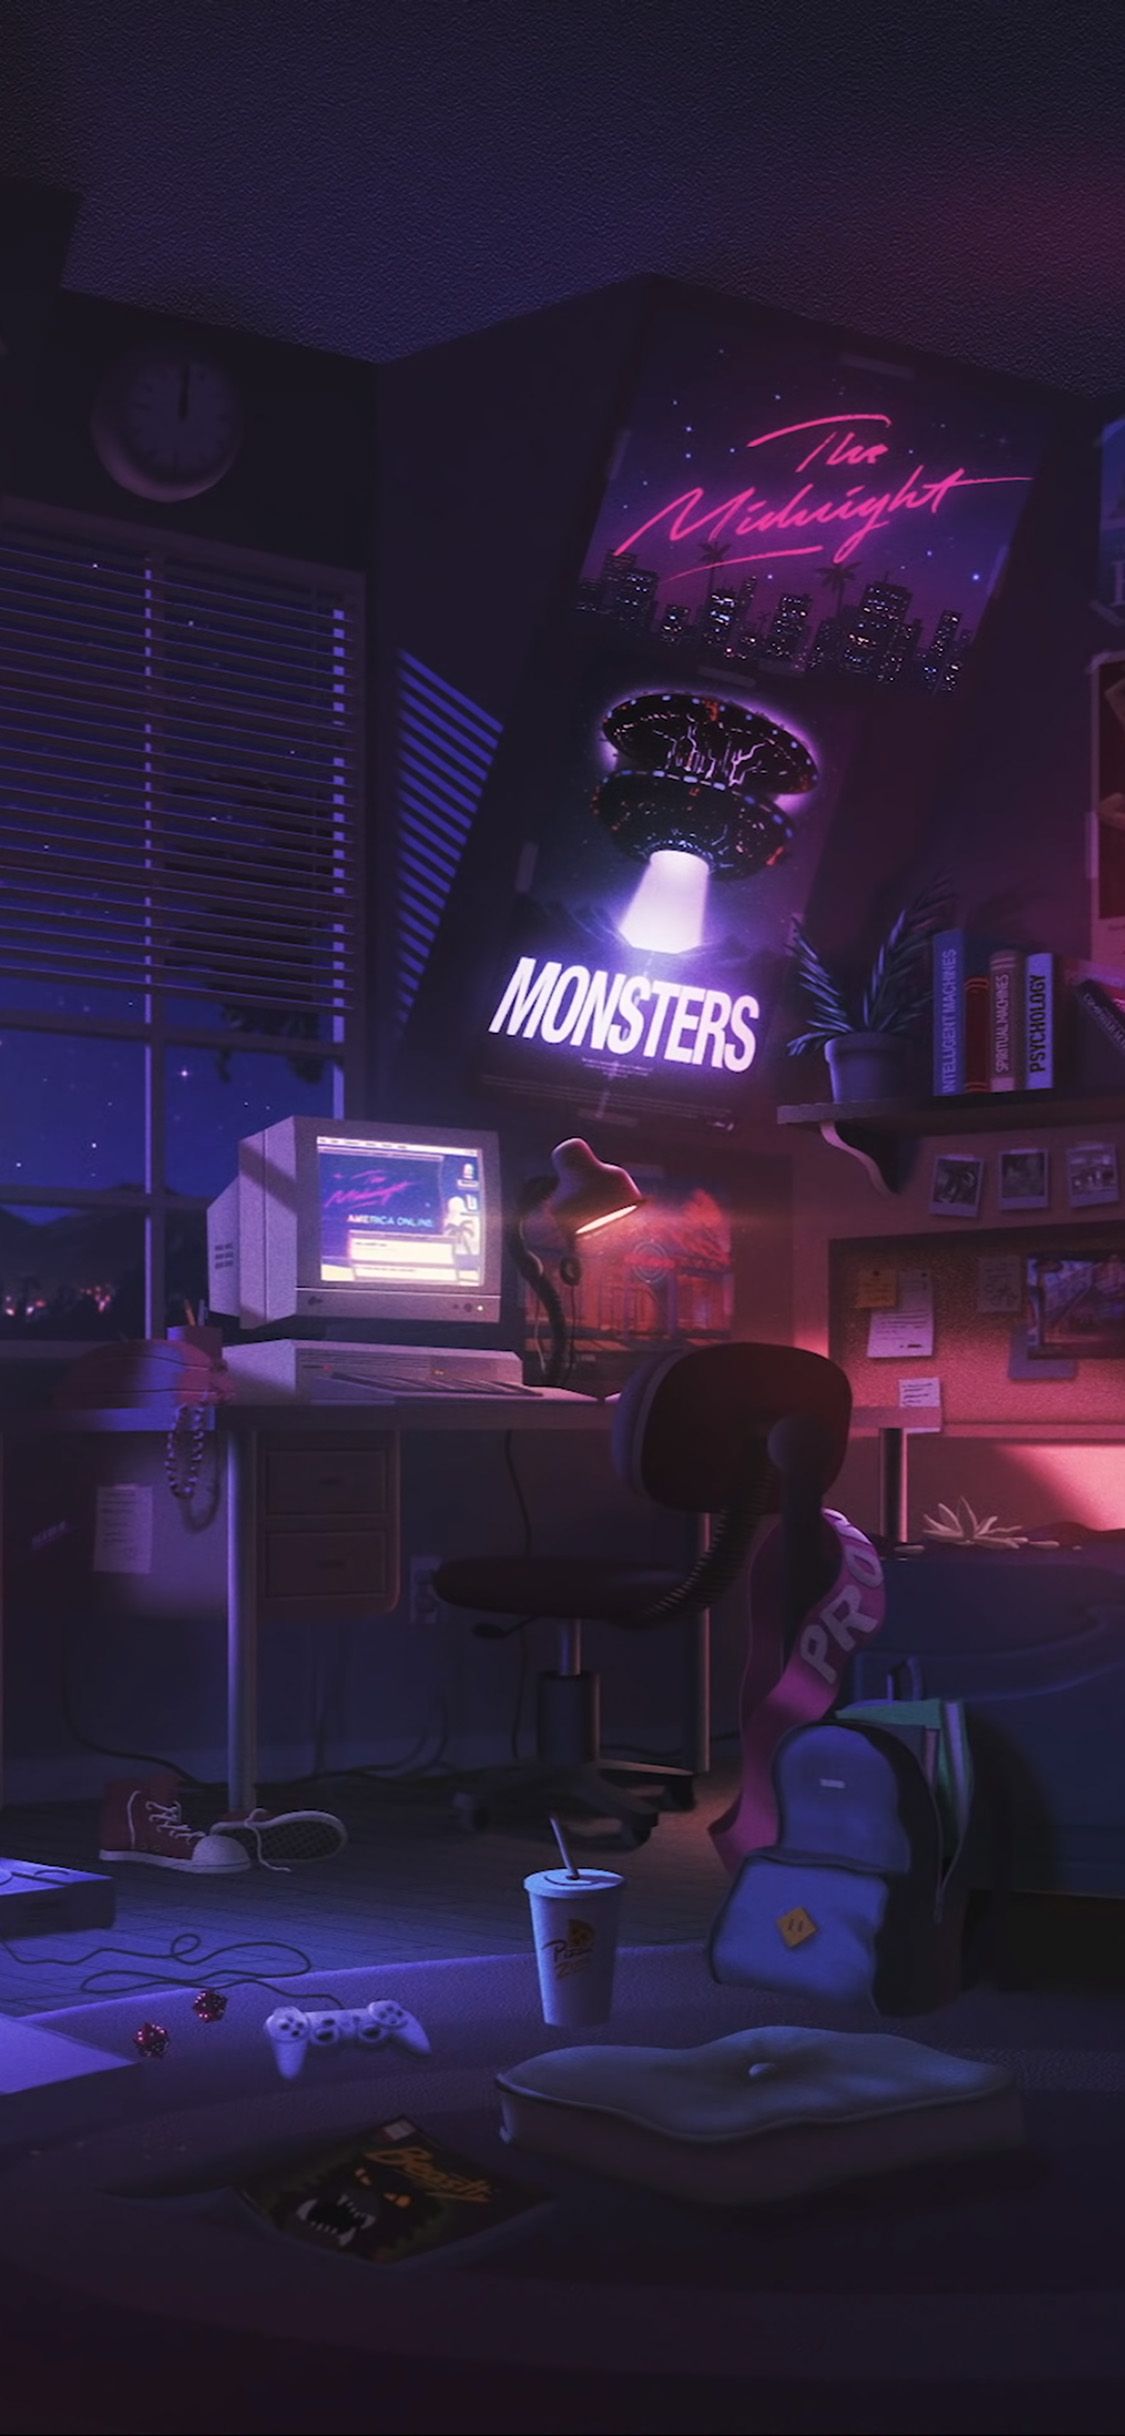 A dark room with the words monsters on it - Night, anime